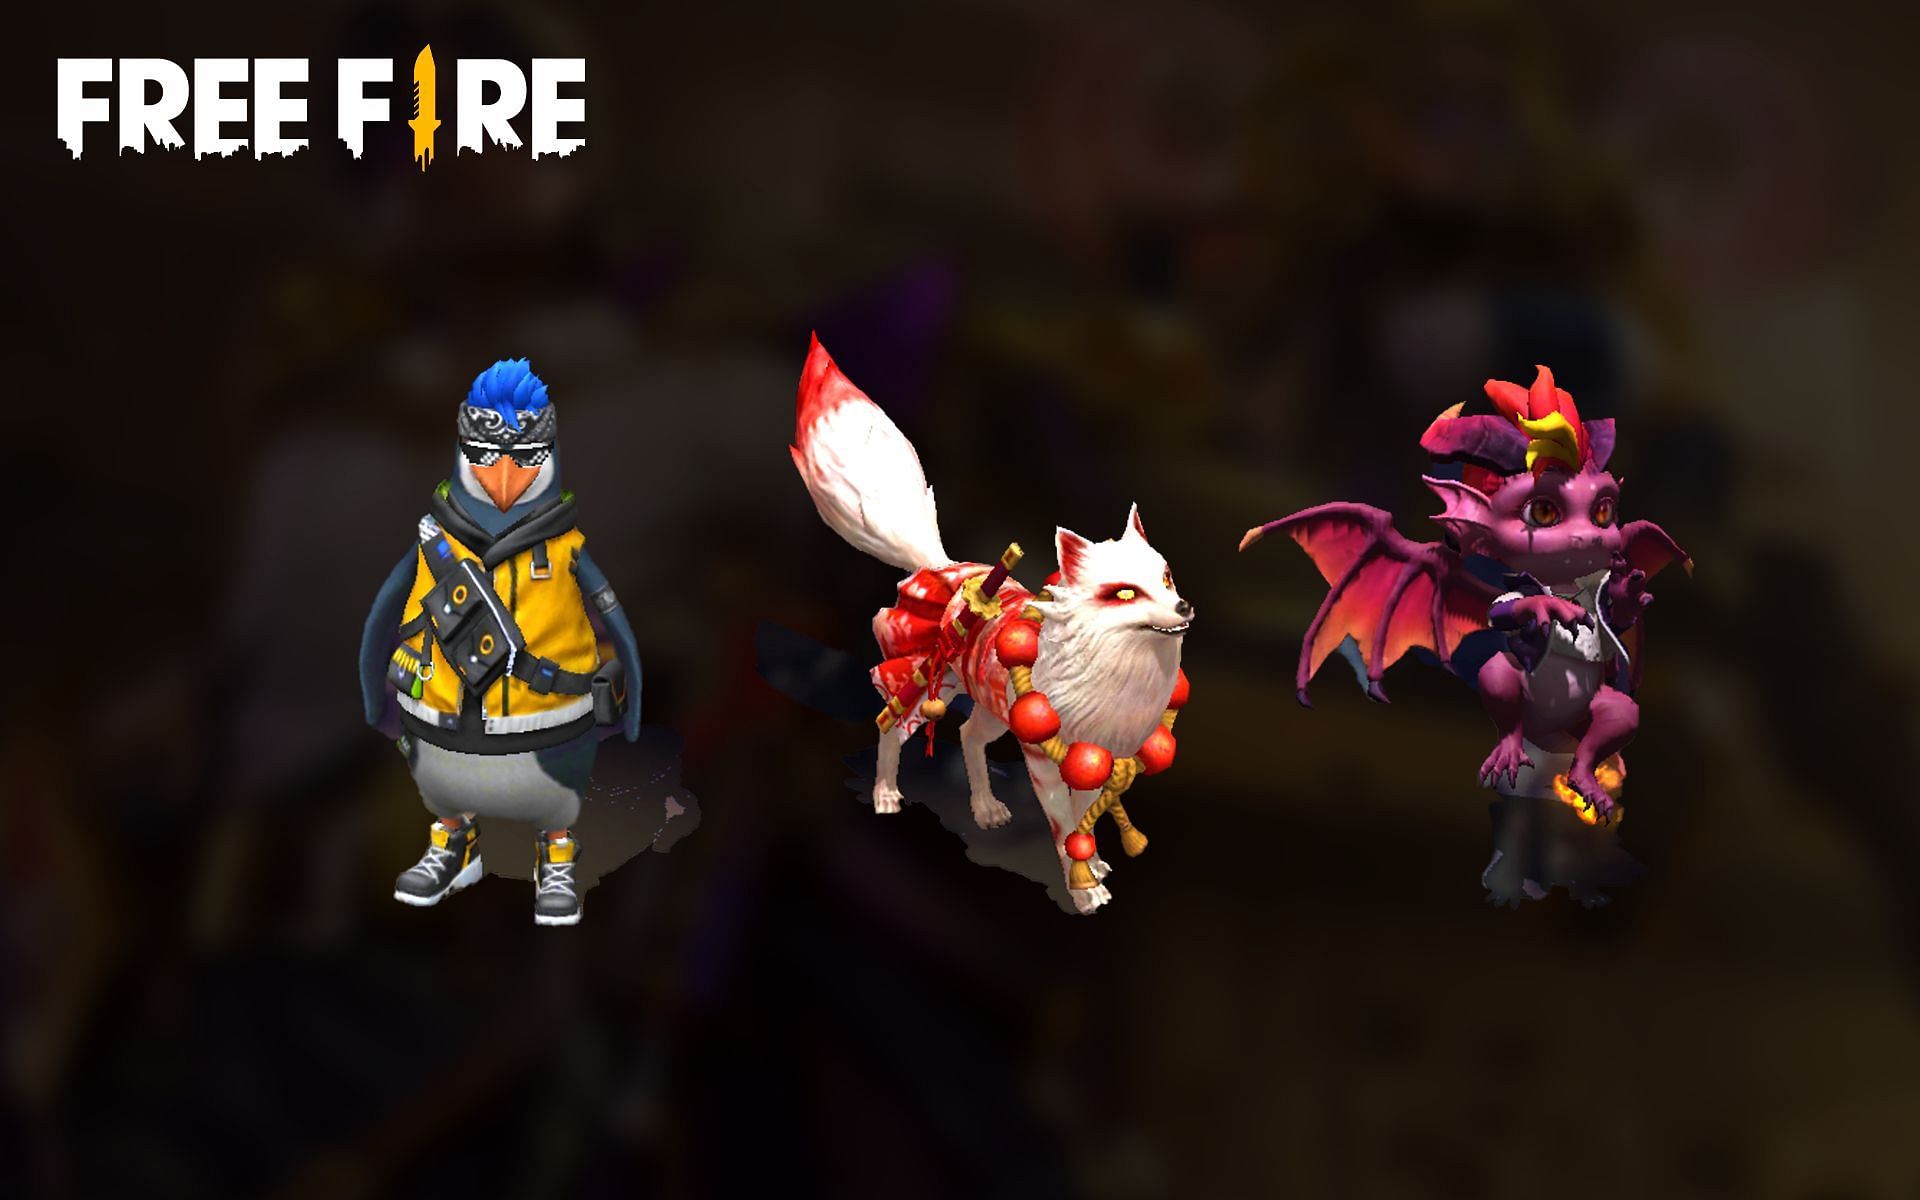 Gamers can get one of the three pets for free in Free Fire MAX (Image via Sportskeeda)